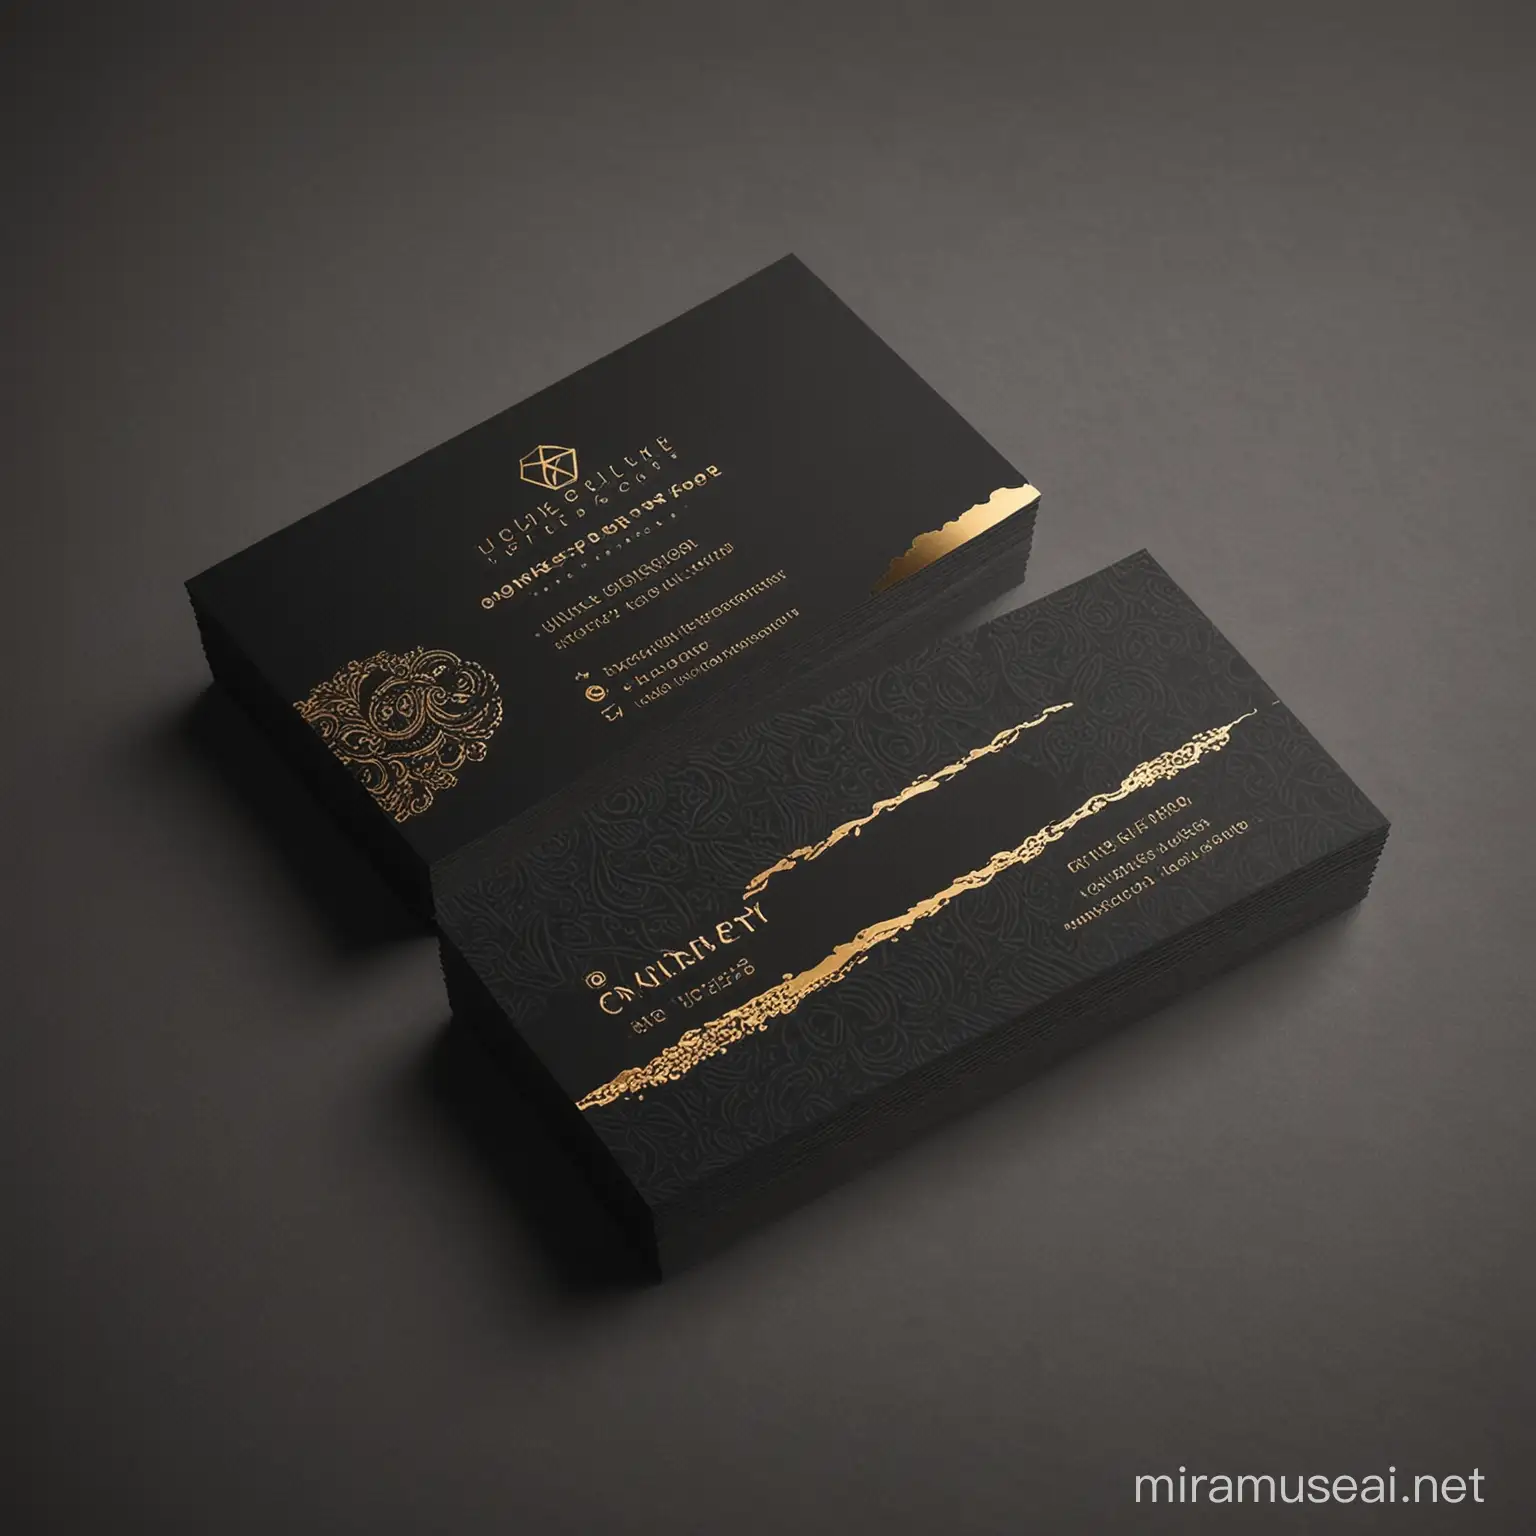 Elegant Luxury Business Card Design with Intricate Details and Sophisticated Typography